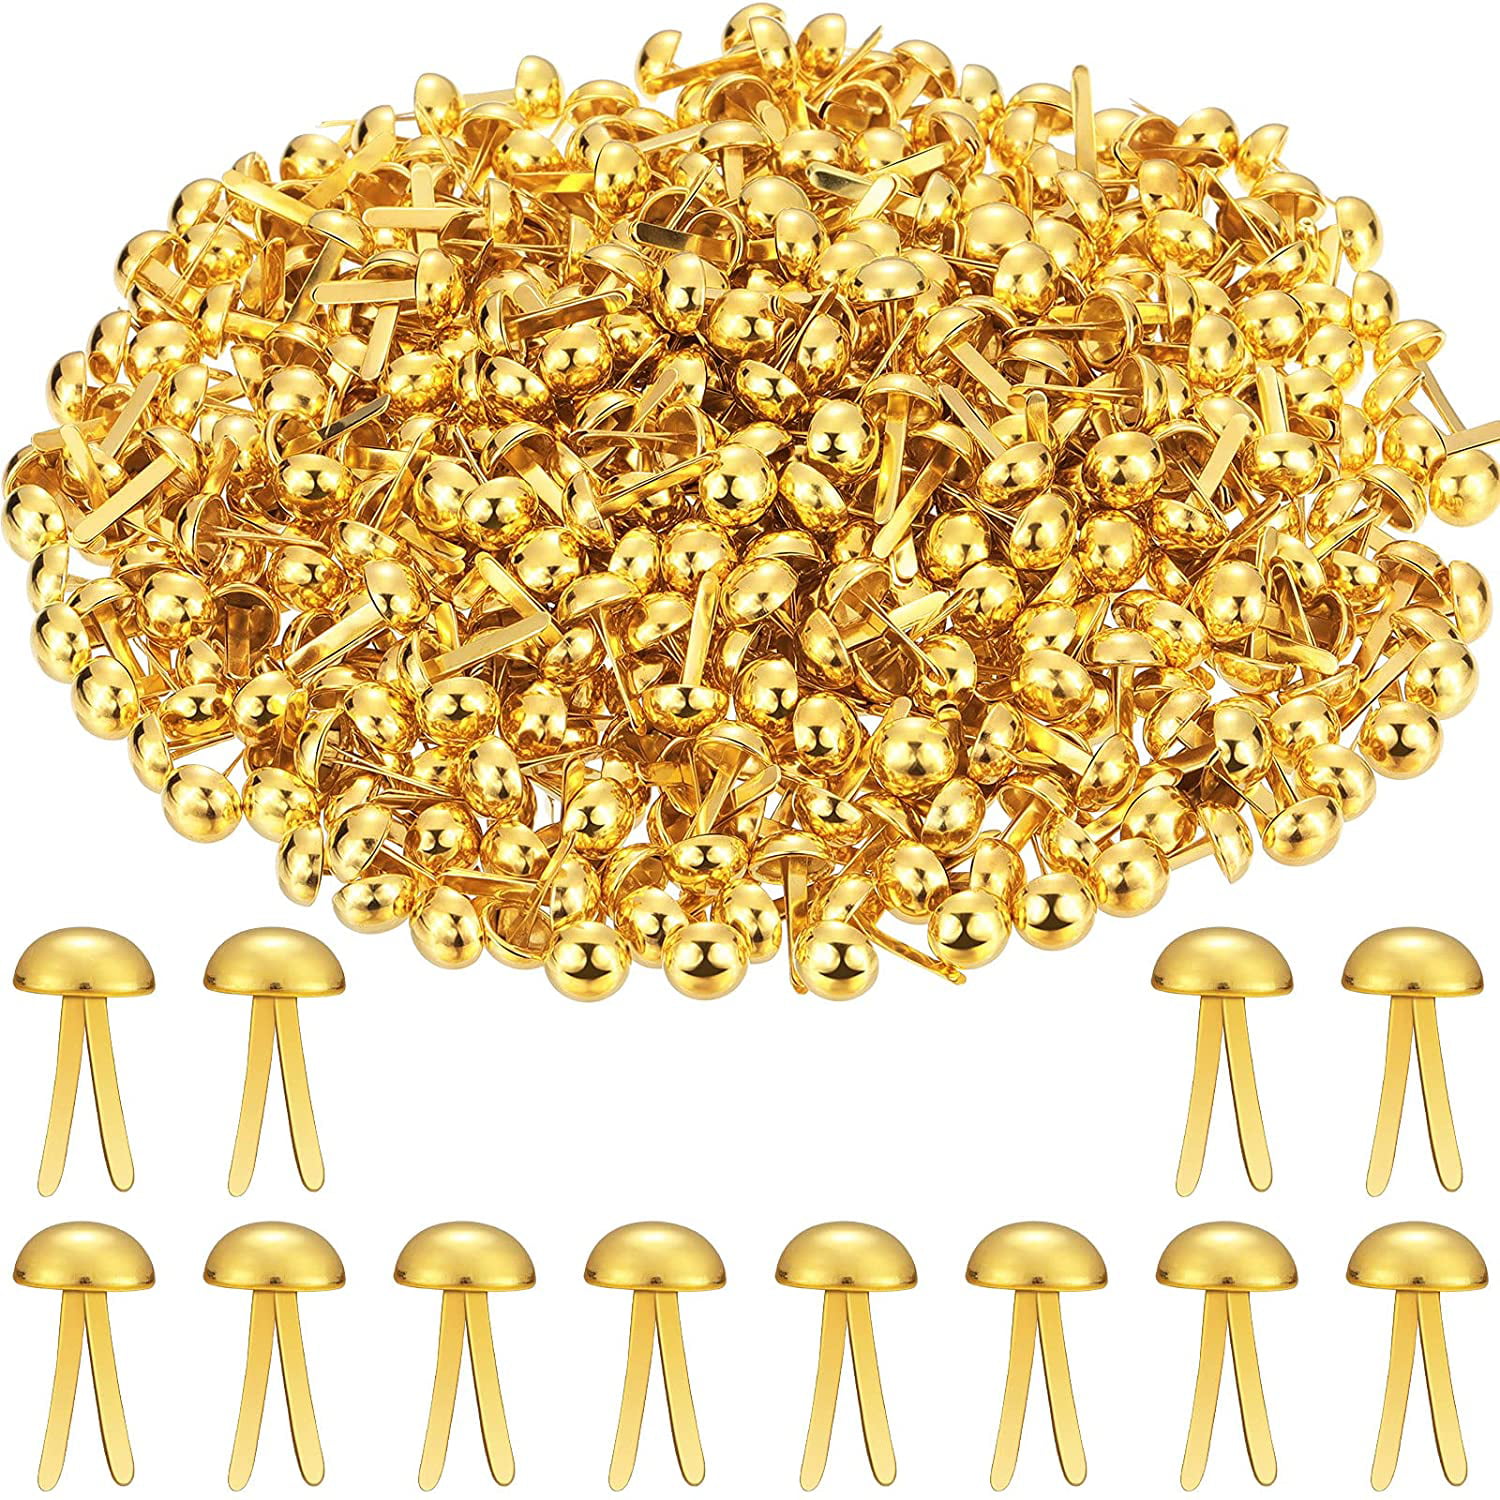 500 Pieces Mini Gold and Silver Small Paper Fasteners Brass Plated Scrapbooking Brads Round Metal Brads for Crafts Making DIY 